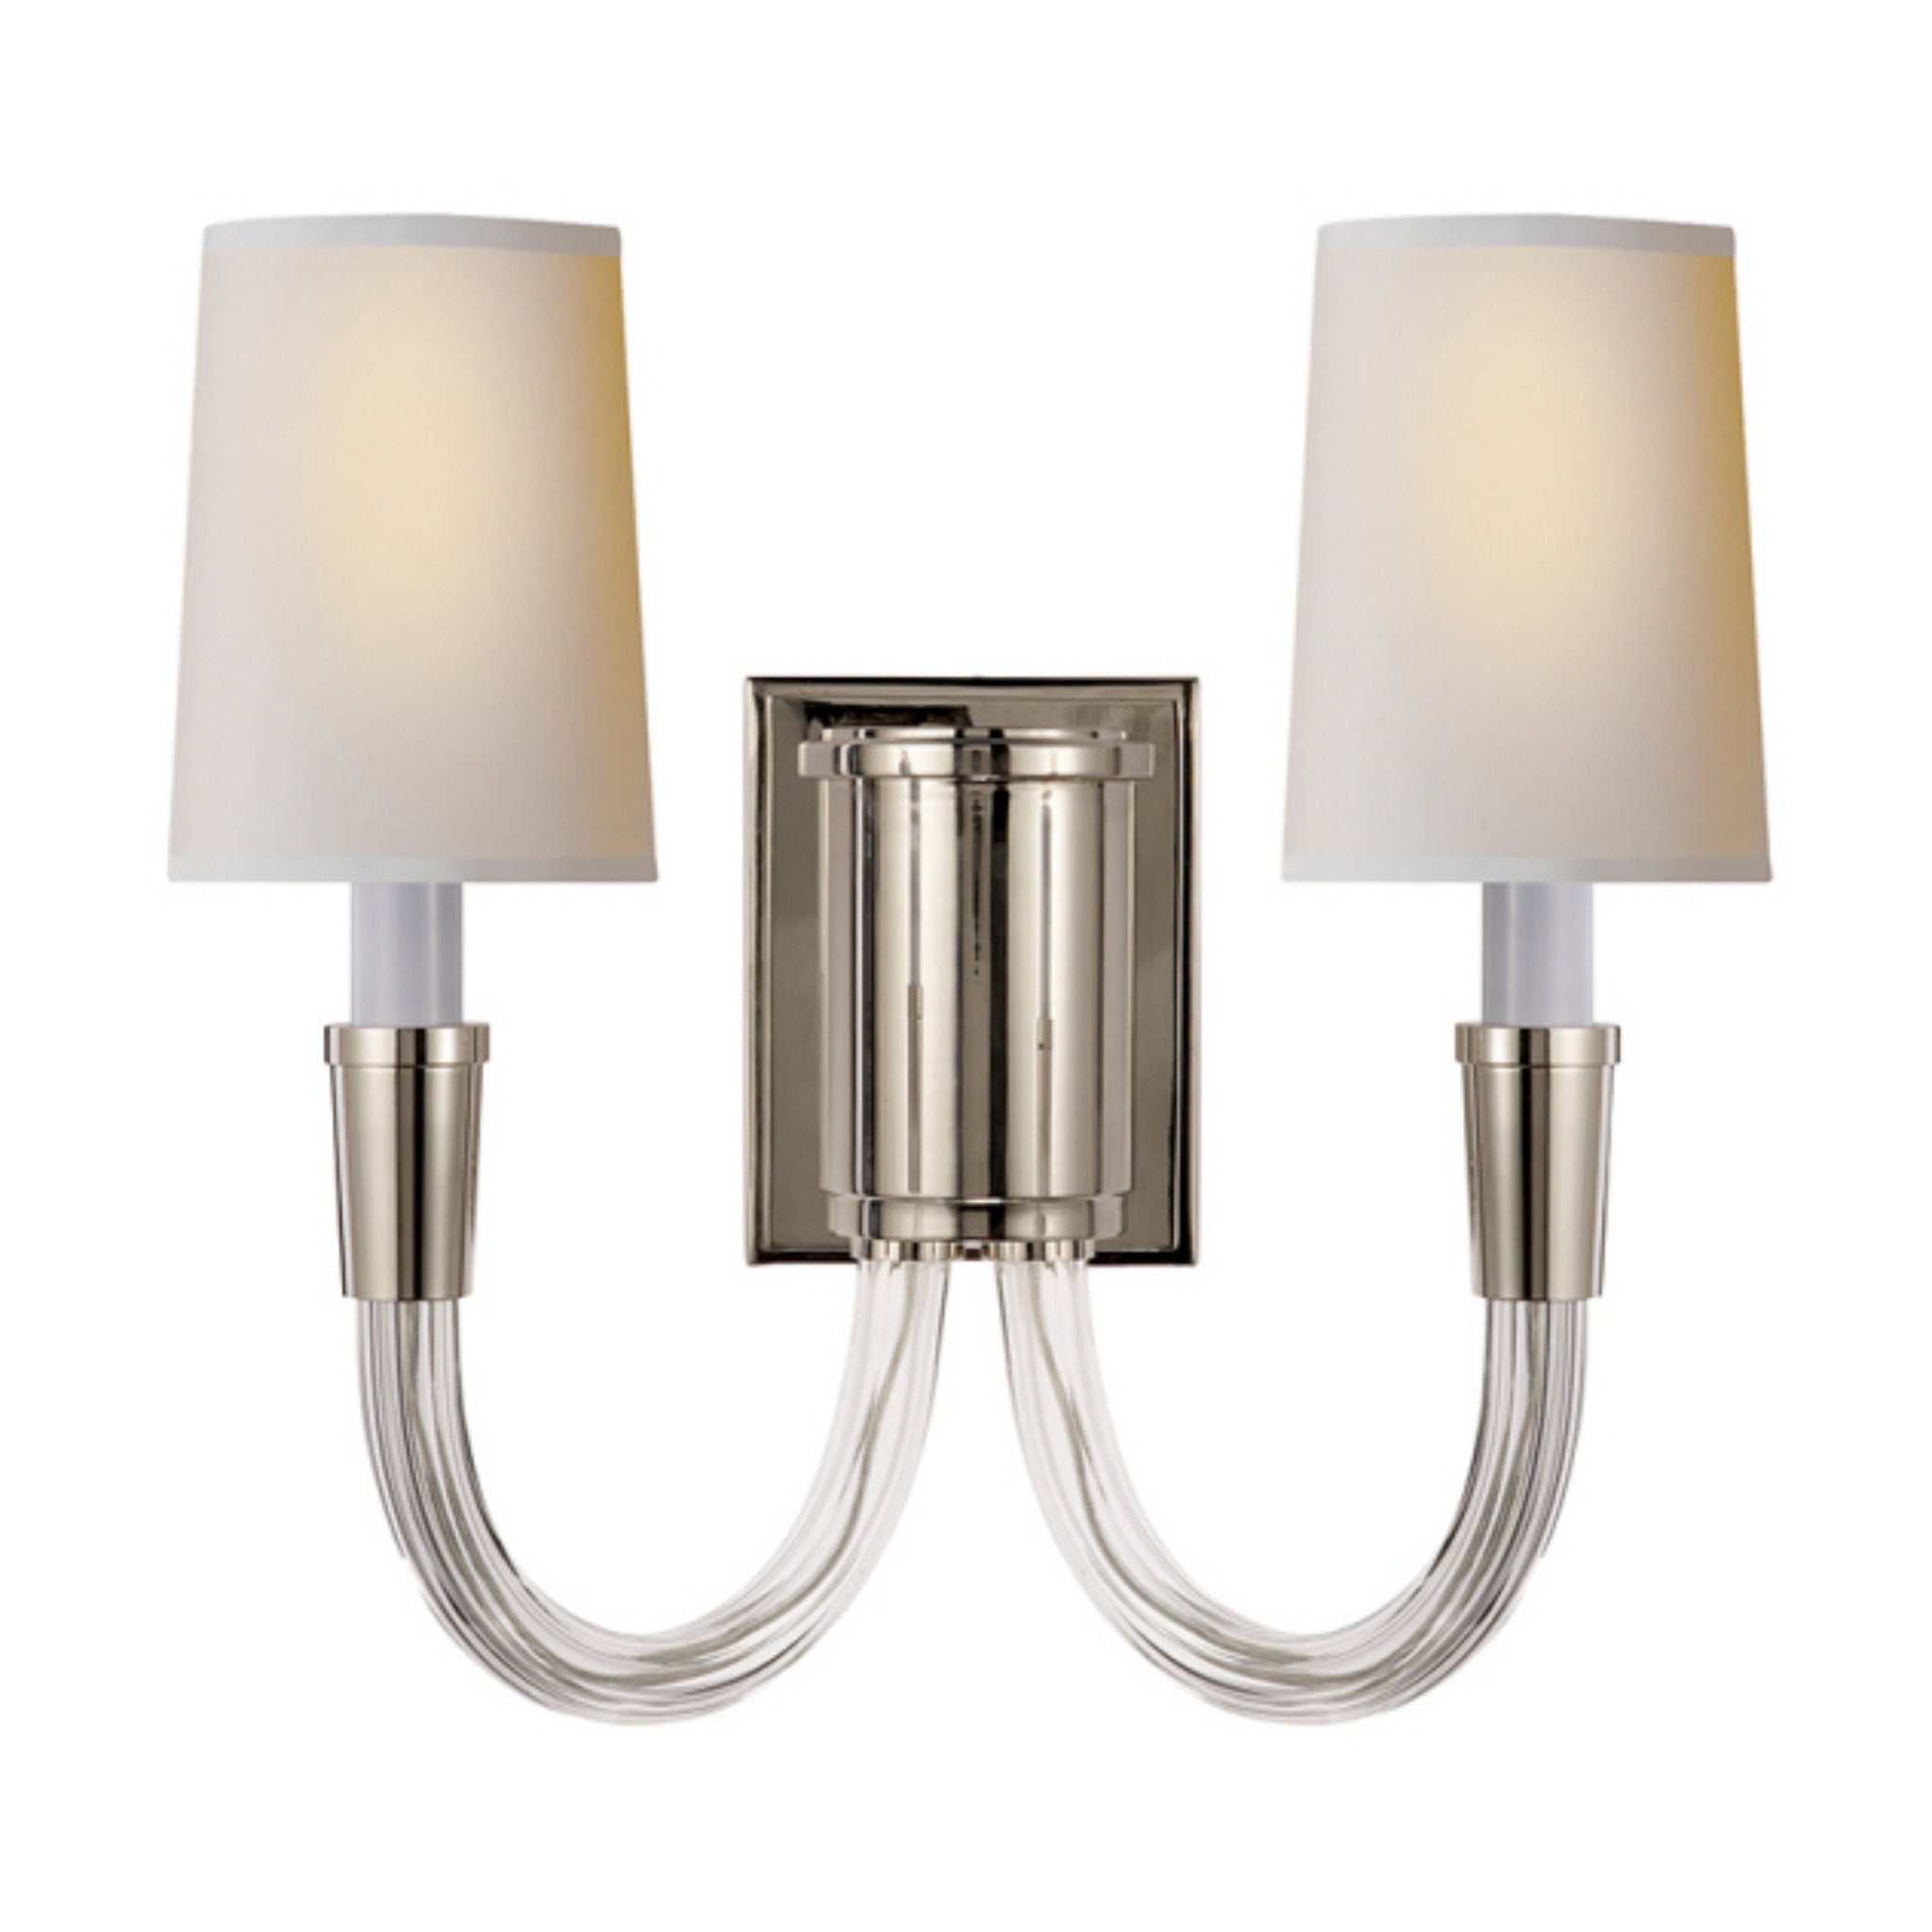 Modern Library Sconce